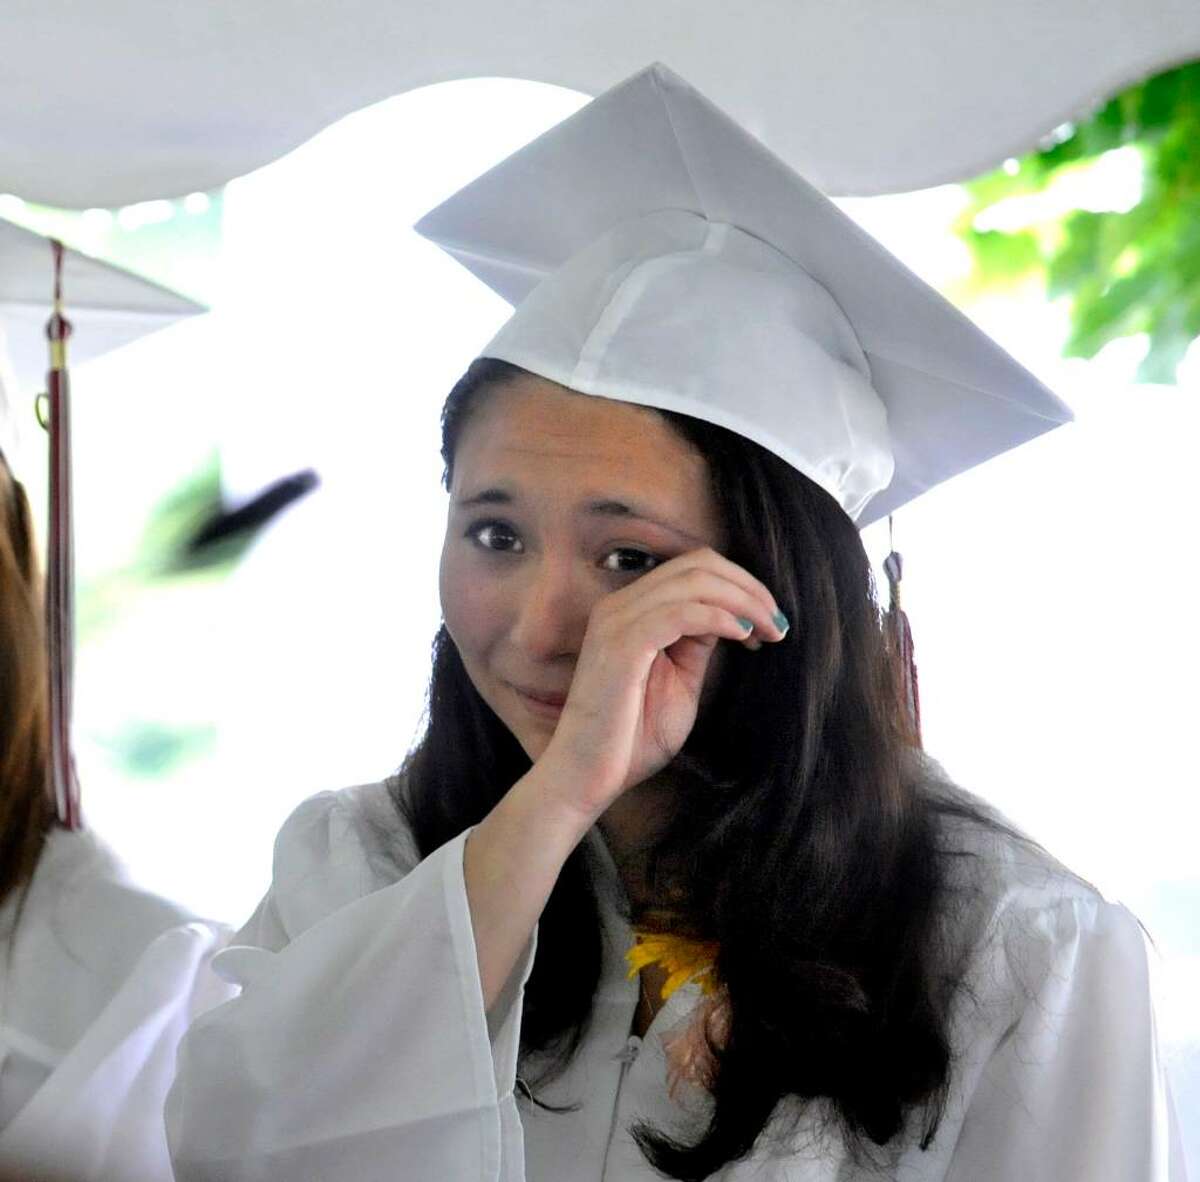 Laina Emily Piera wipes away a tear during Wooster School Commencement in Danbury, on Saturday, June 12, 2010.